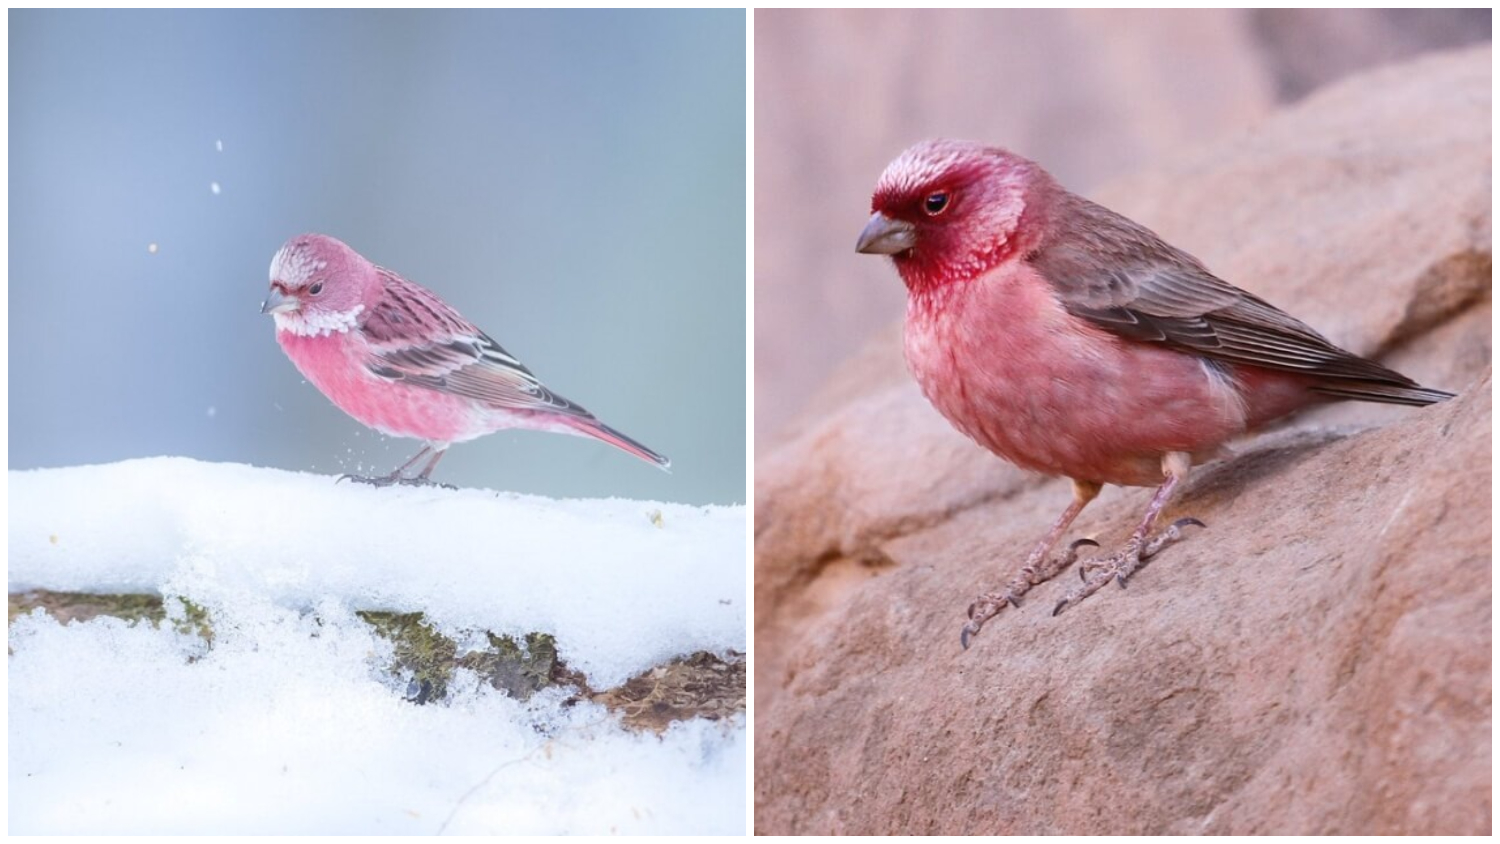 Meet The Rosefinches - The Small, Pink-coated Birds Renowned for The Stunning Beauty